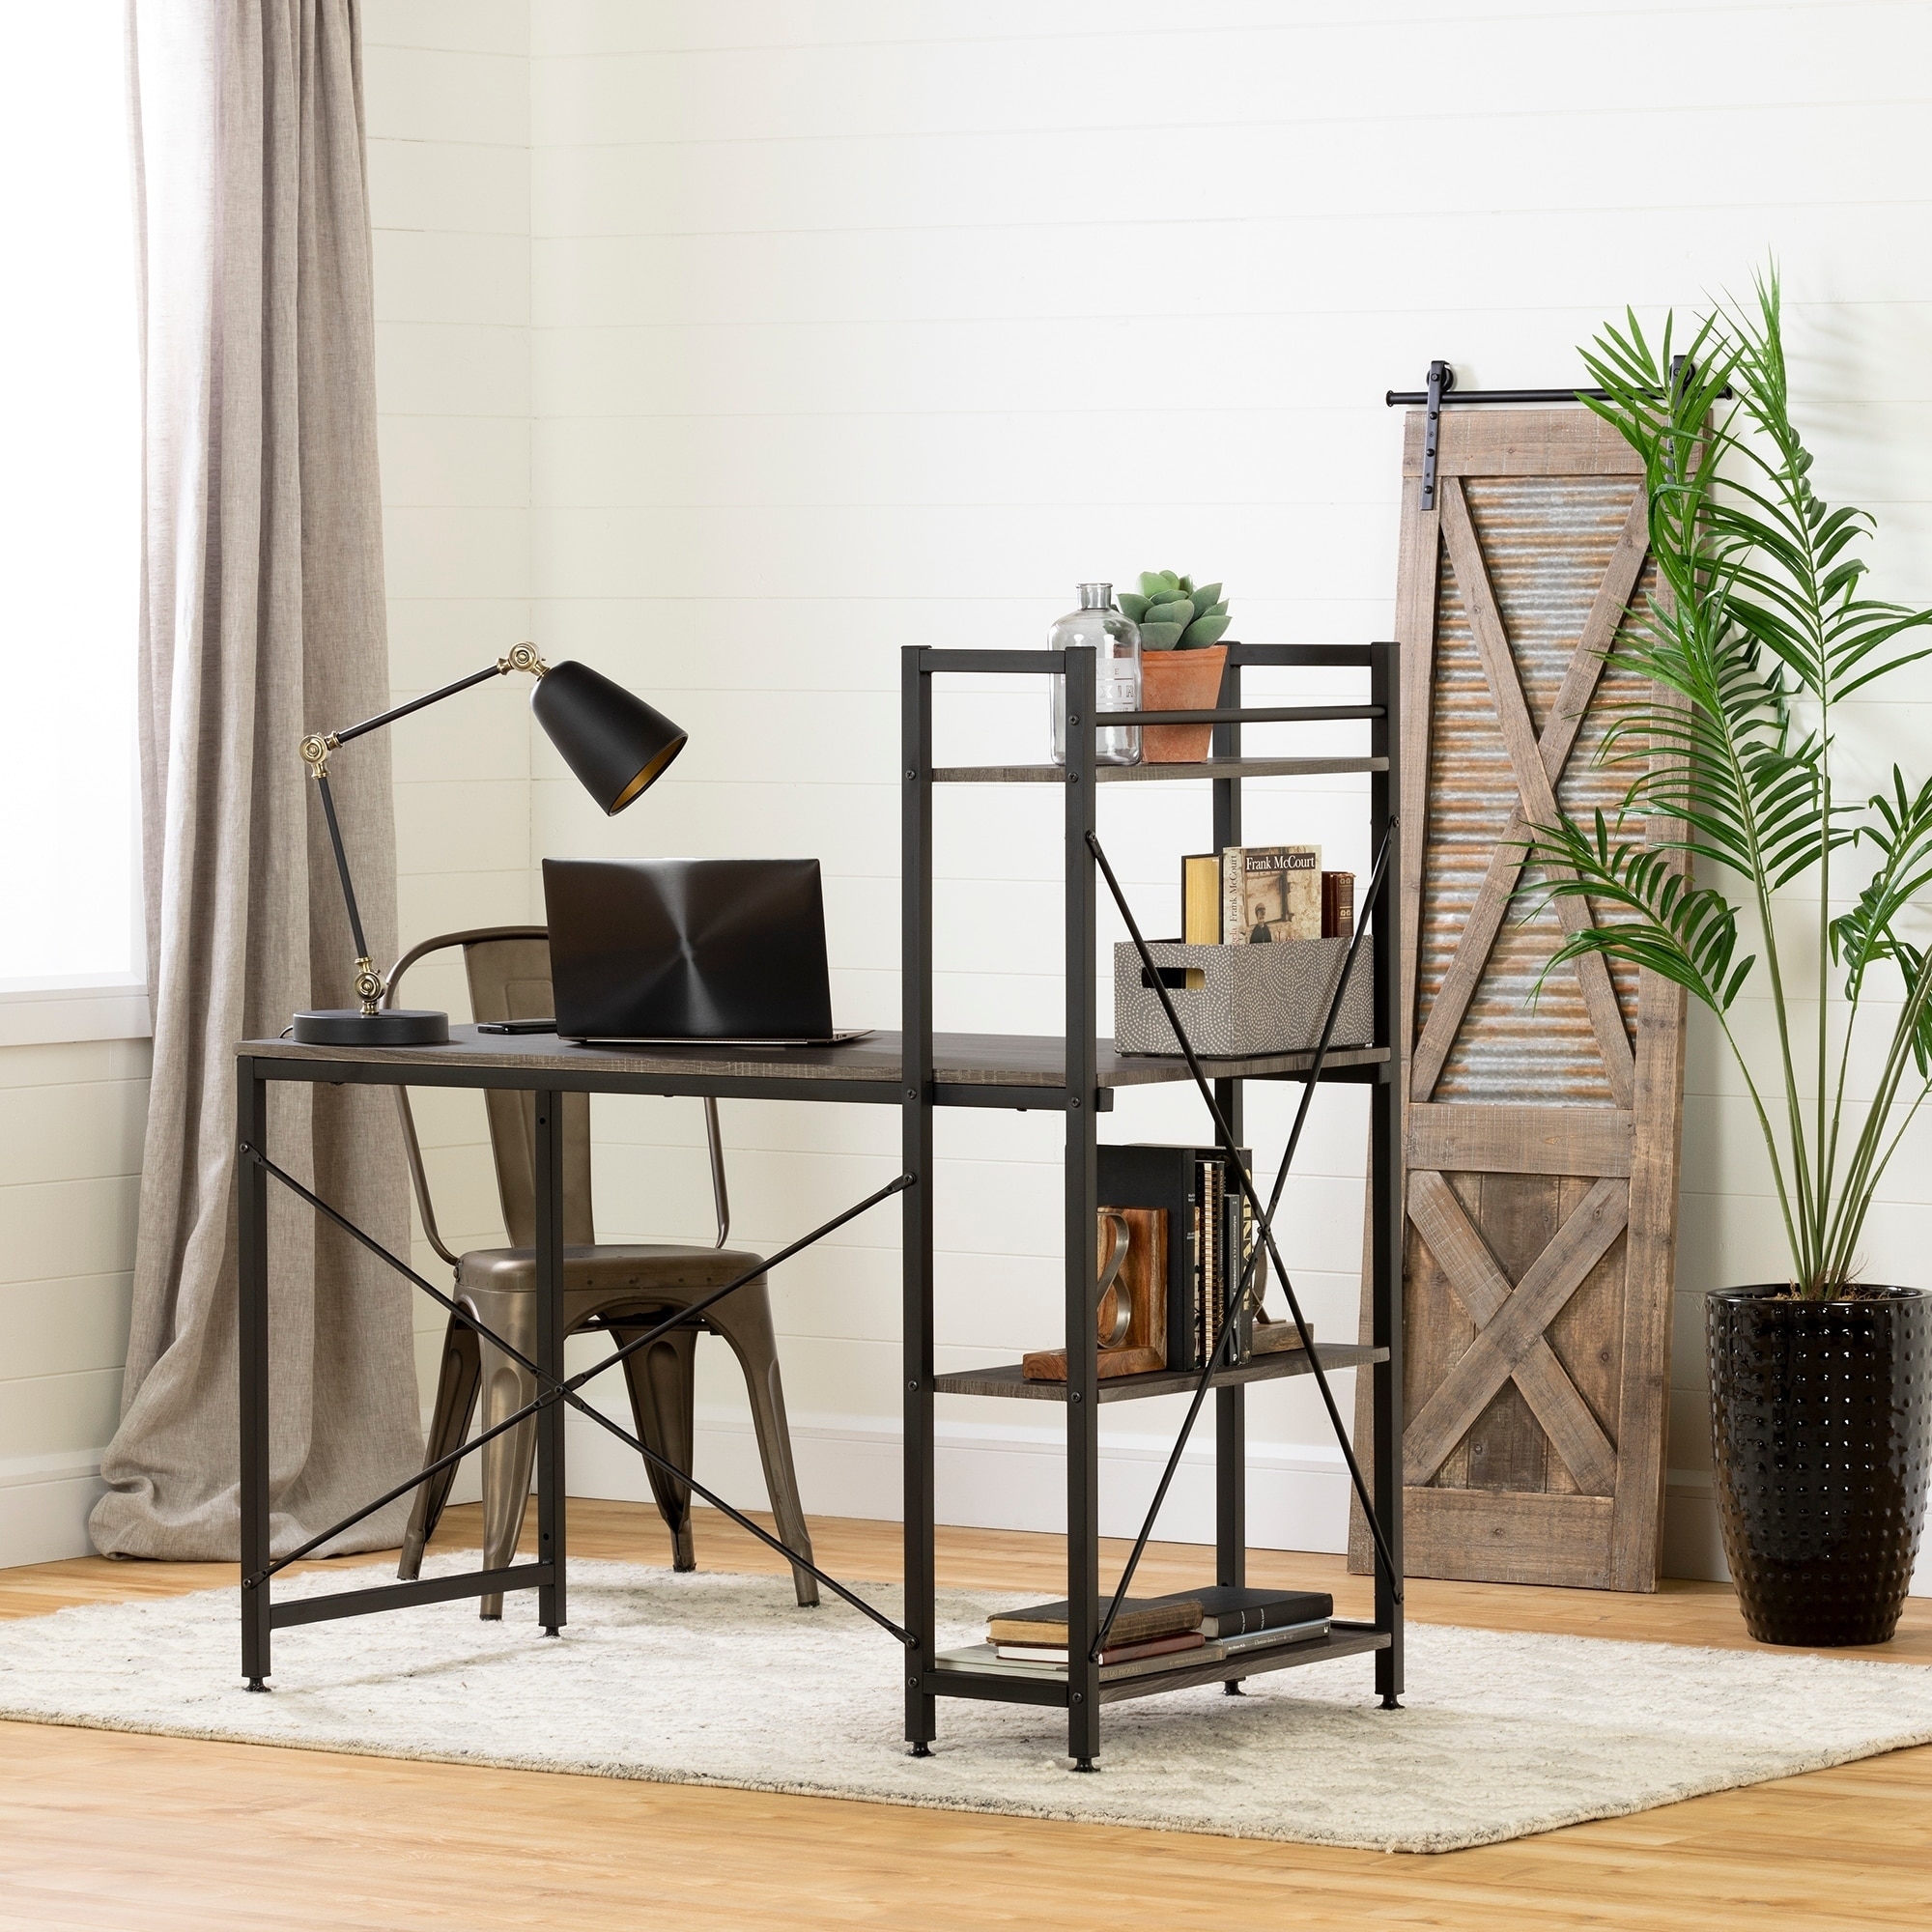 Shop South Shore Evane Industrial Desk With Bookcase Overstock